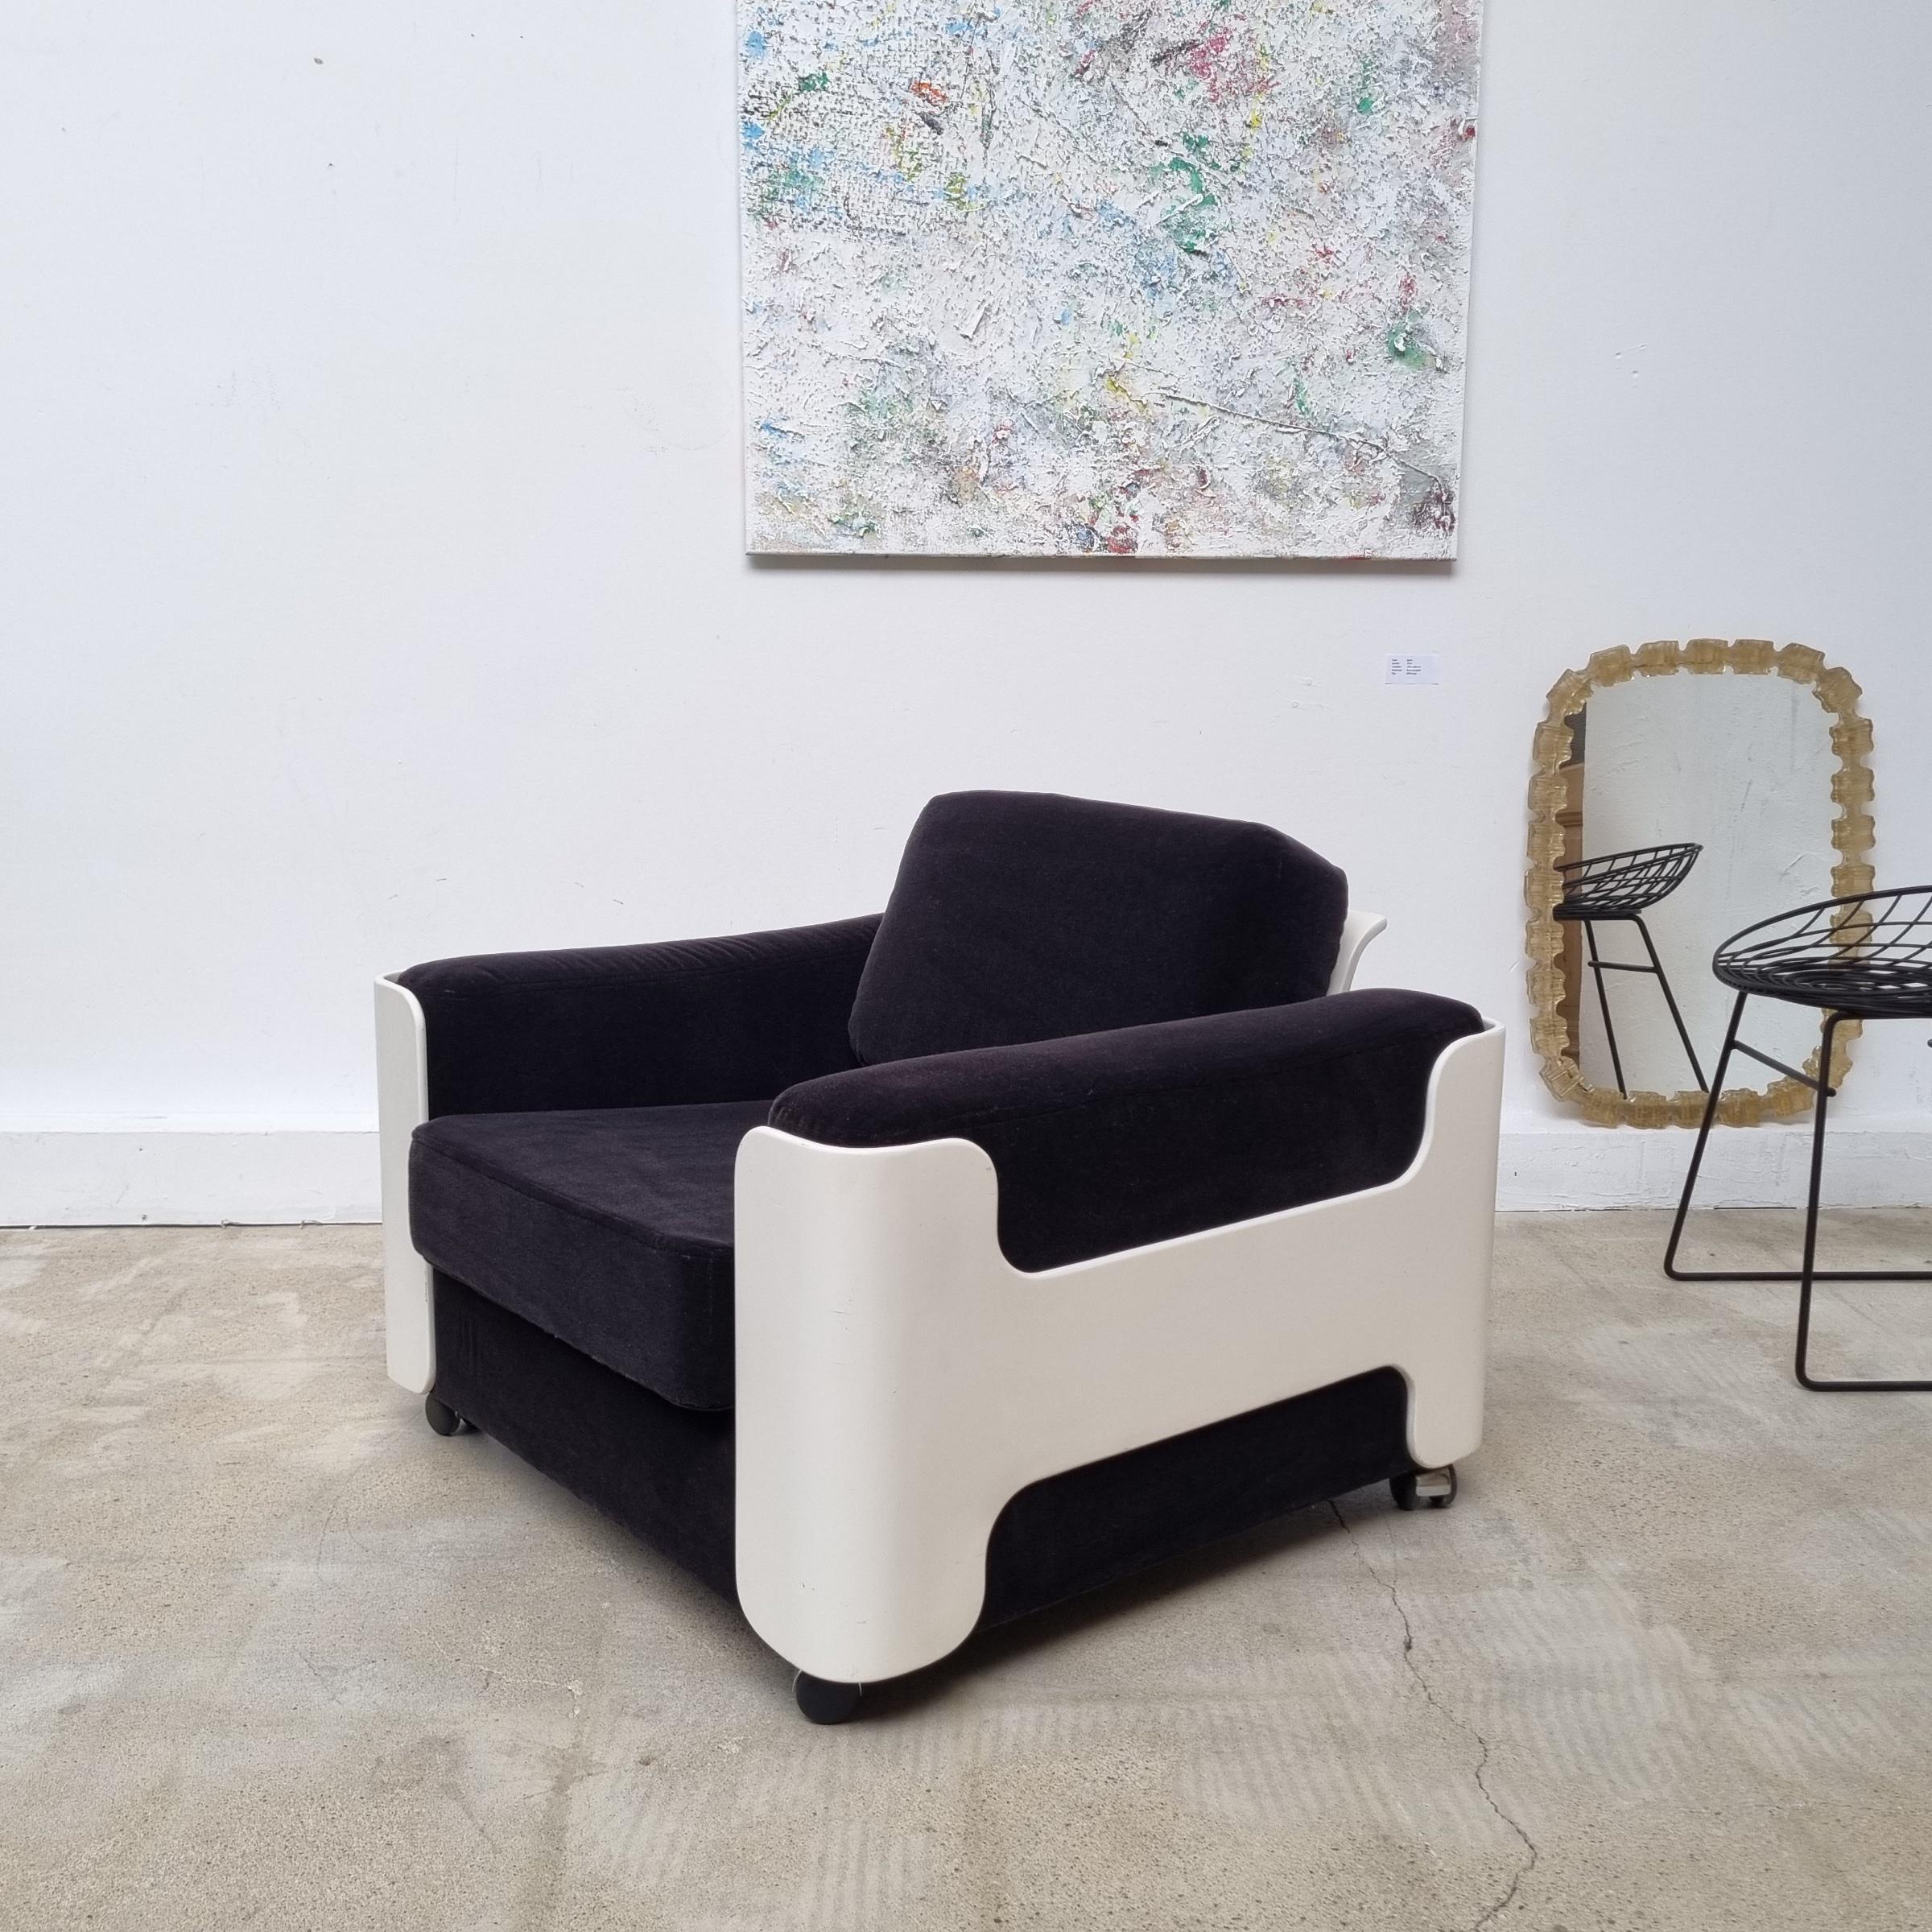 Impressive fiberglass lounge chair in the style of Joe Colombo, Italy, 1970s. Newly upholstered in beautiful black velvet.
 